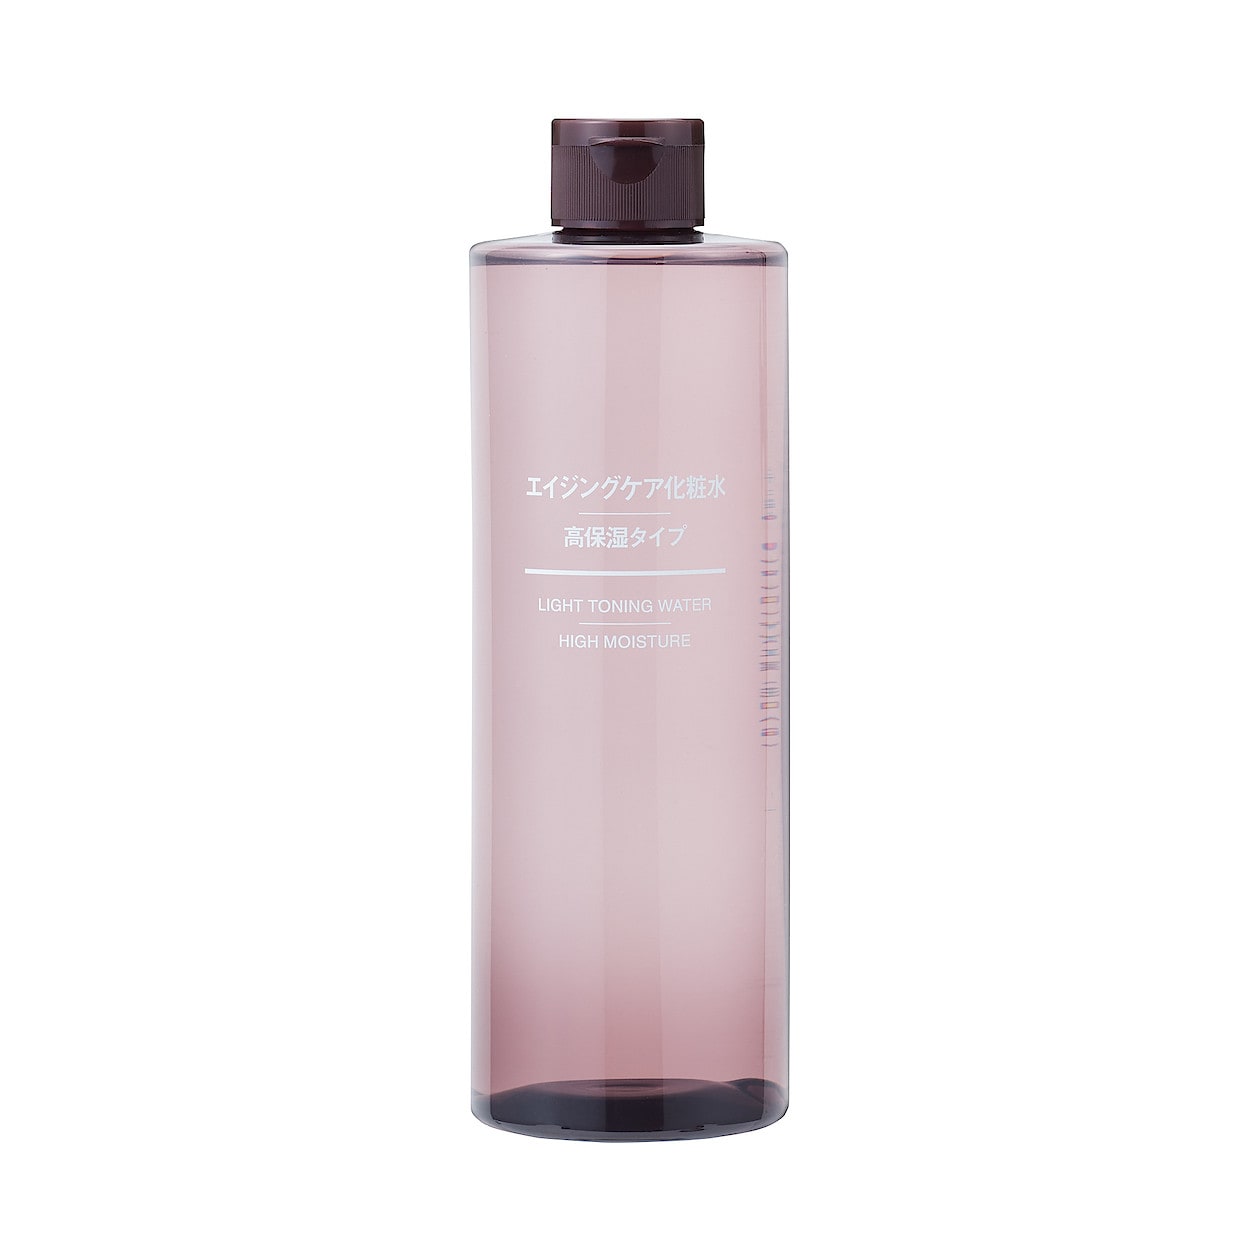 Muji Aging Care Skin Lotion - 400ml - High Moisturizing - Harajuku Culture Japan - Japanease Products Store Beauty and Stationery